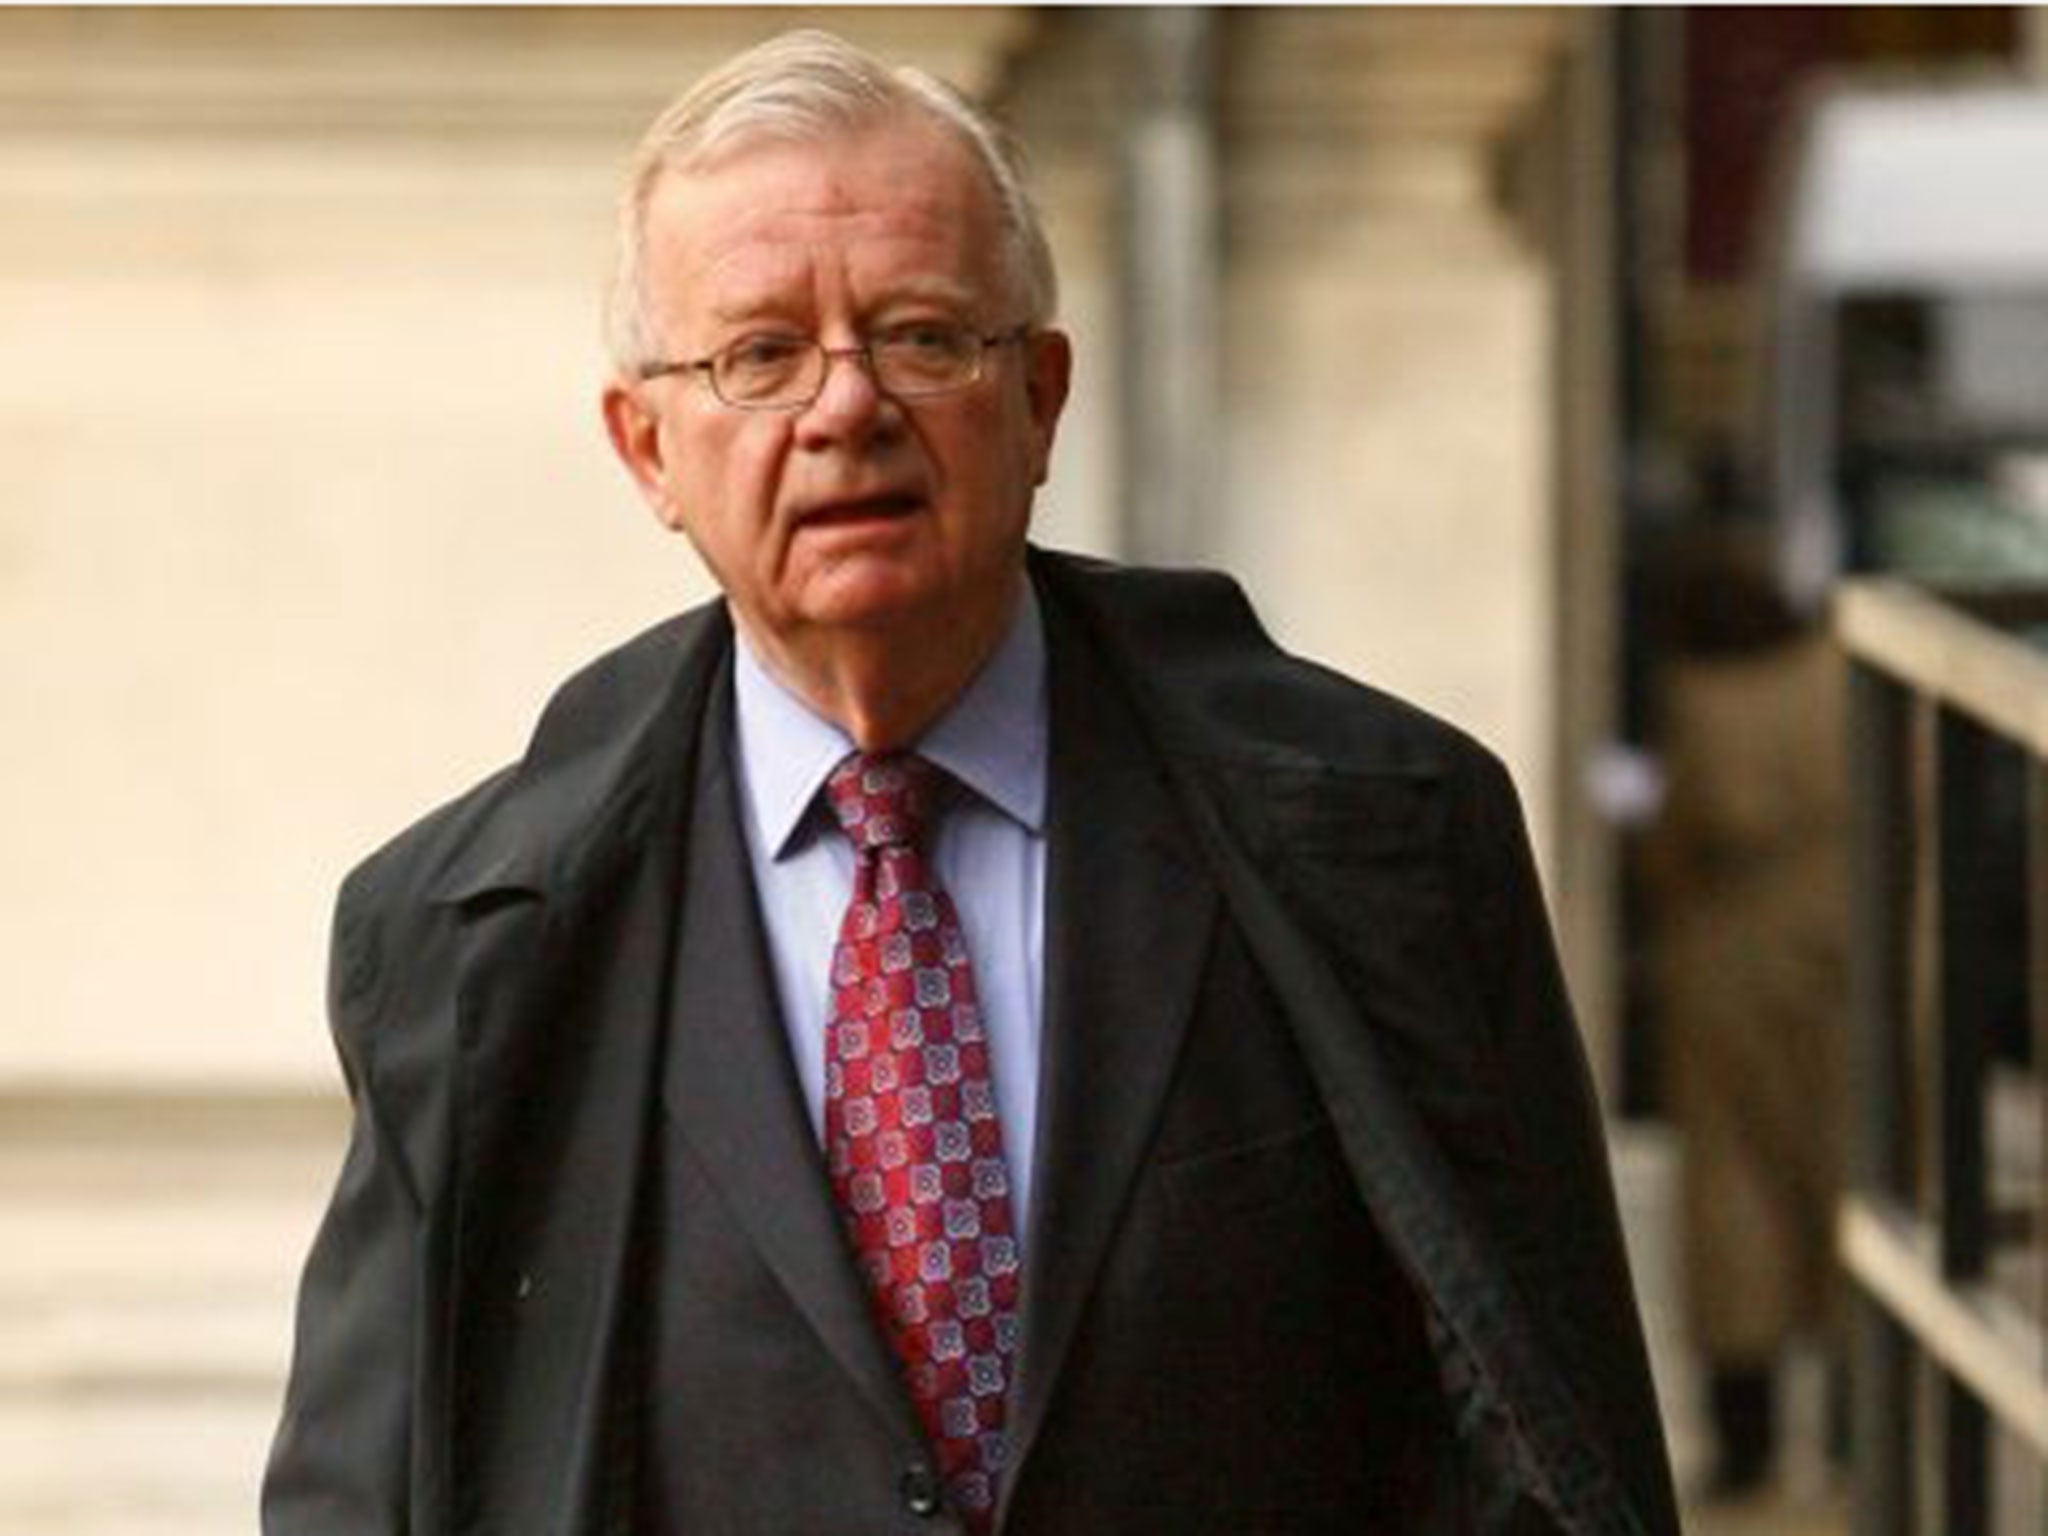 Sir John Chilcot has chaired the inquiry